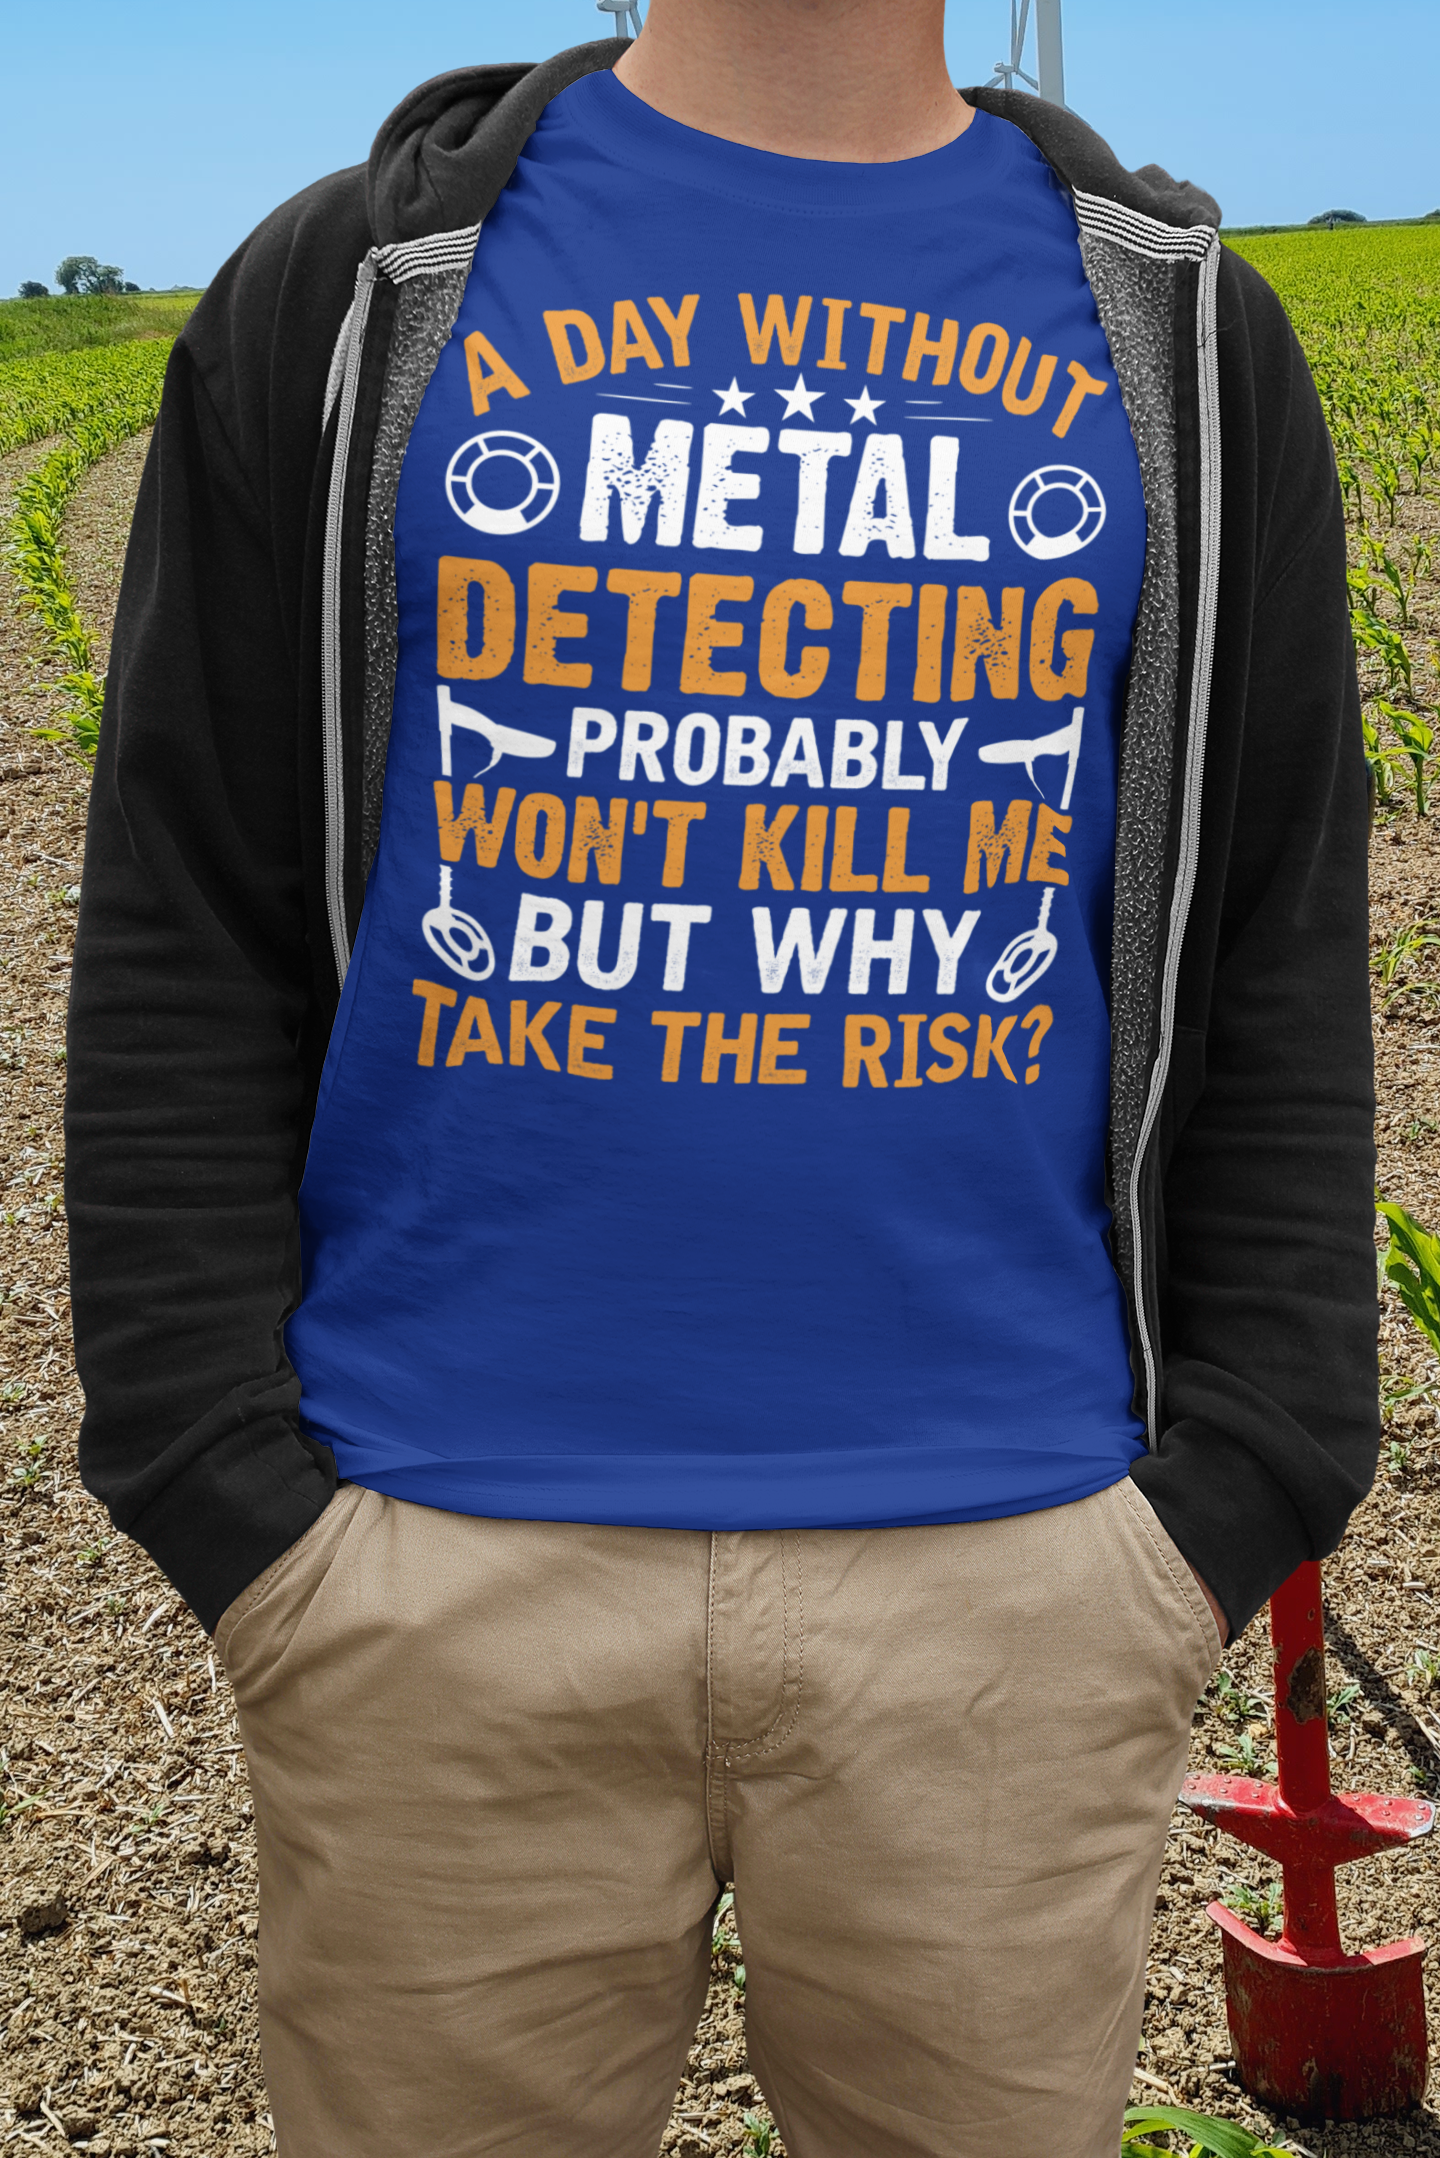 A day without metal detecting probably won't kill me but why take the risk